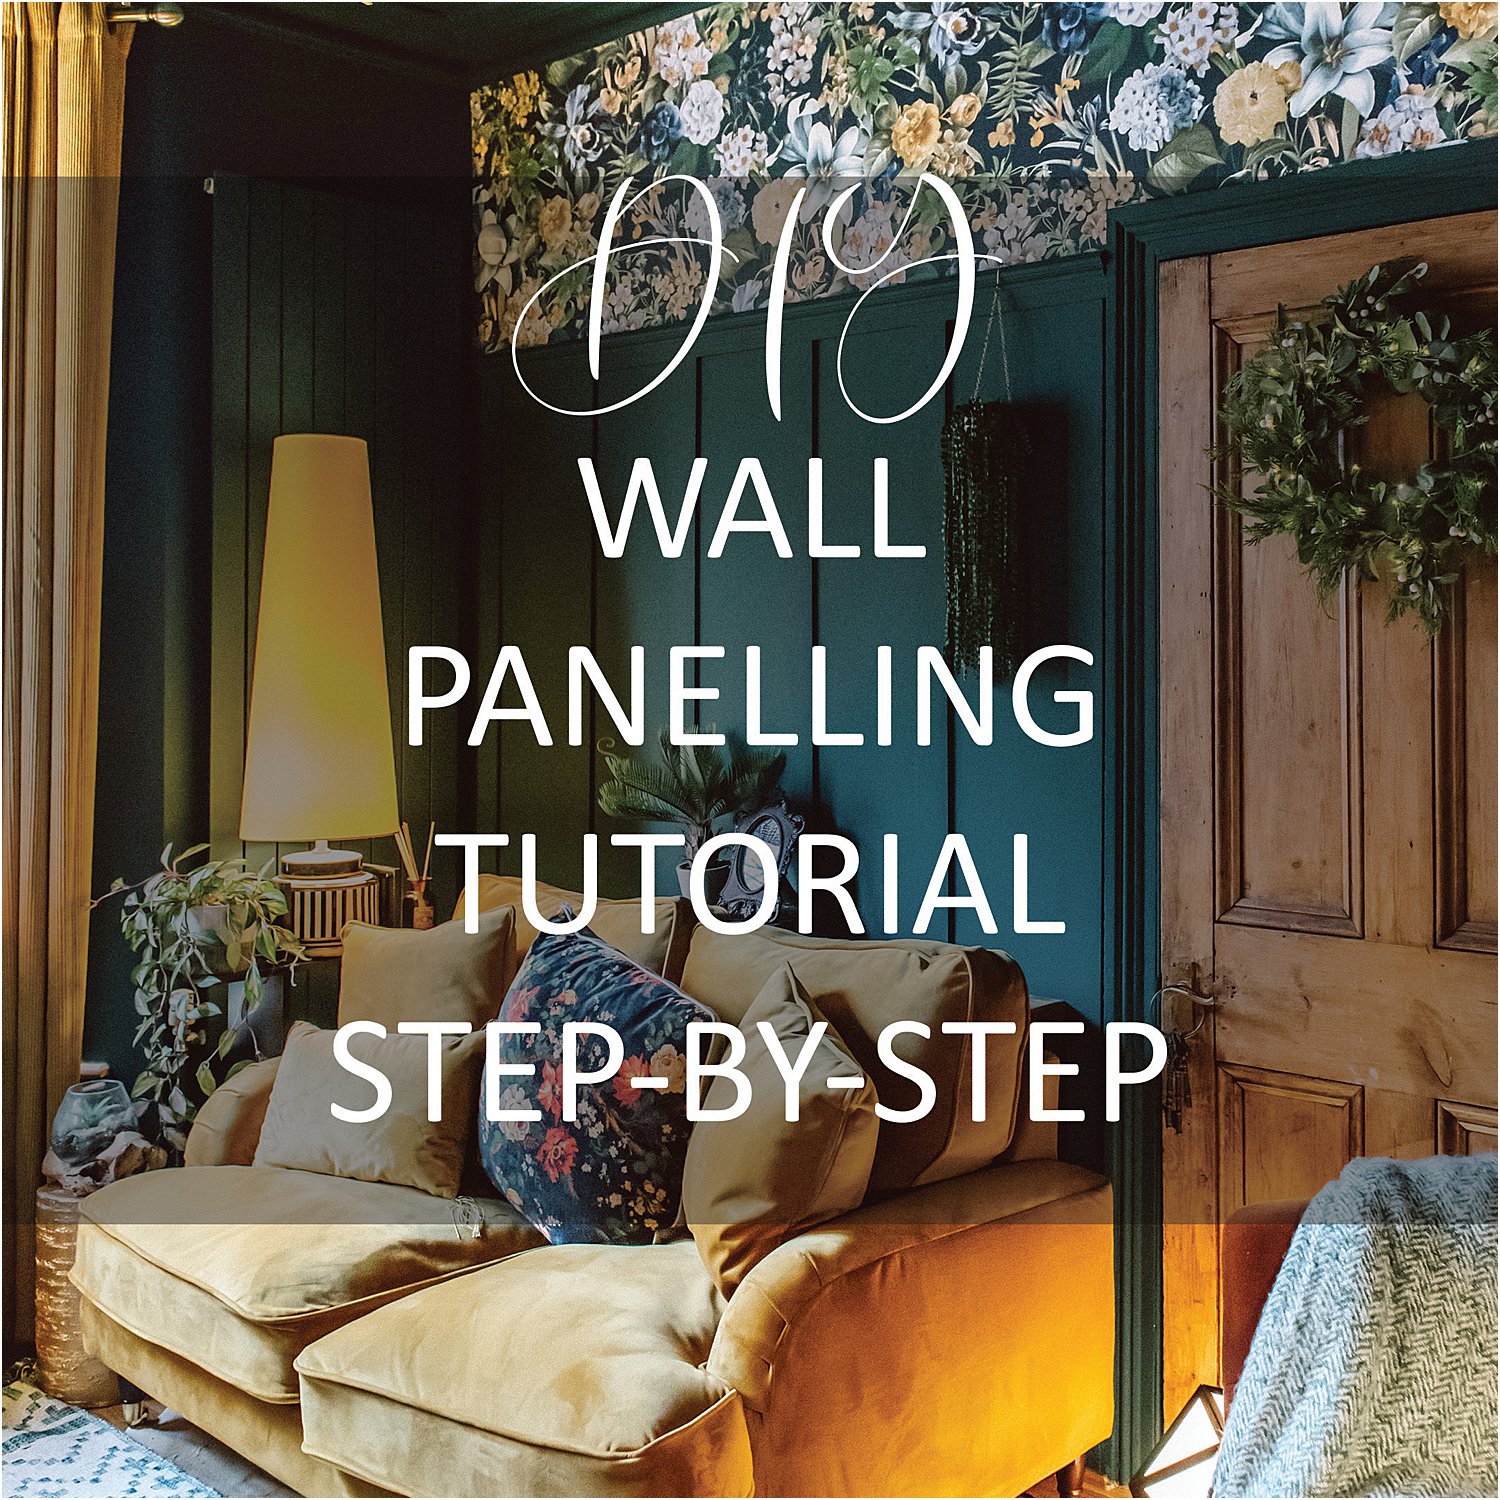 diy-wall-panelling-tutorial-mdf-batten-layered-home